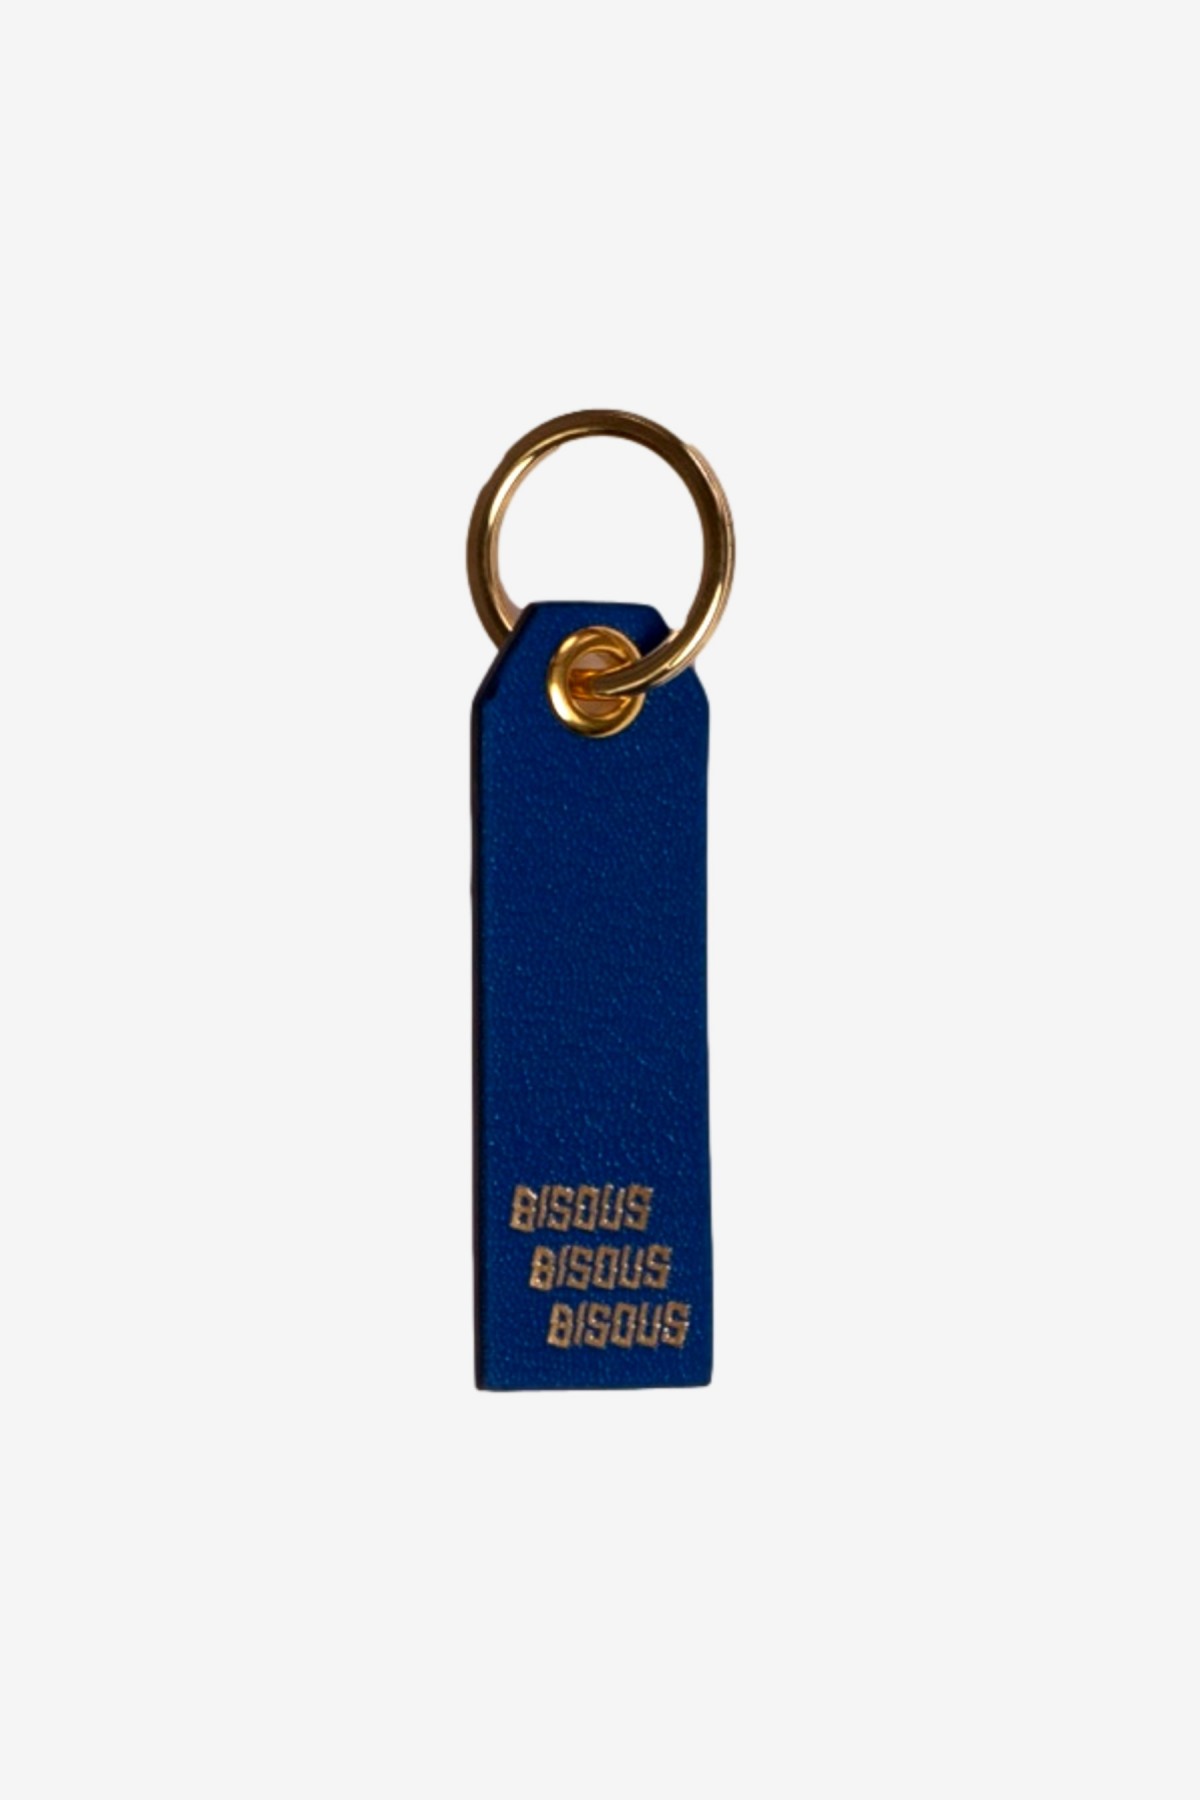 Bisous Skateboard Bisous X3 Key Chain in Royal Blue